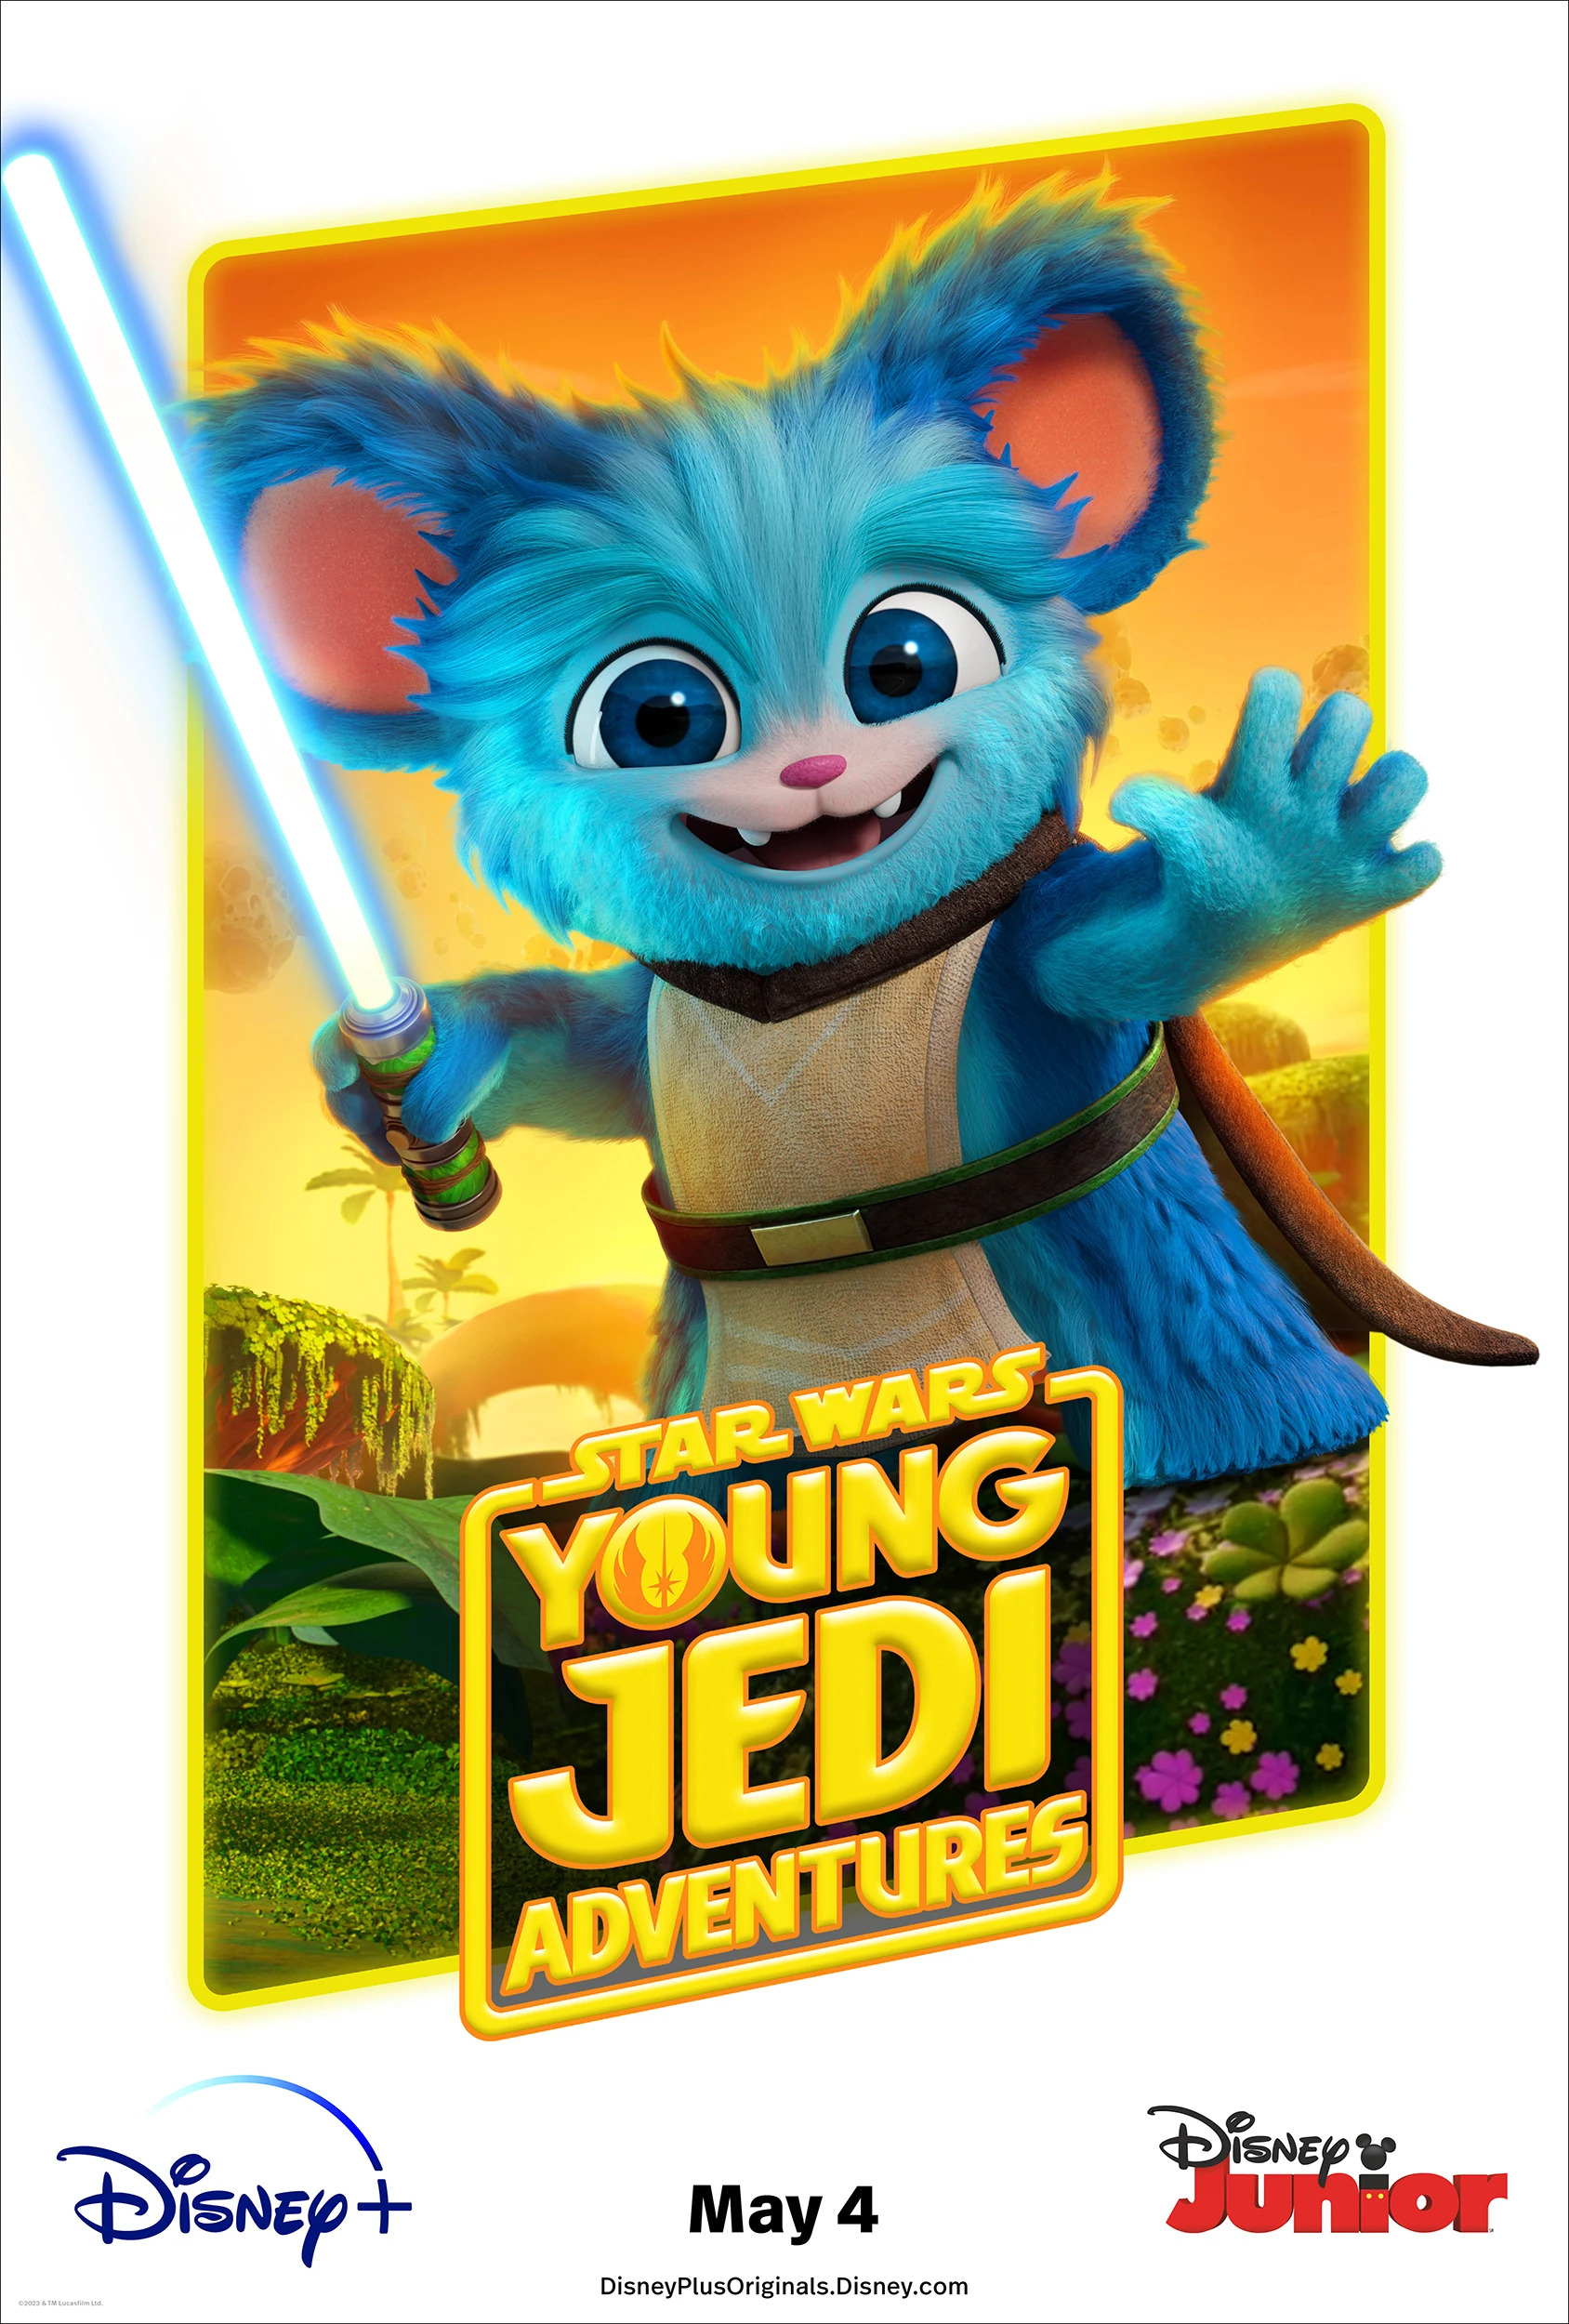 Mega Sized Movie Poster Image for Star Wars: Young Jedi Adventures (#3 of 6)